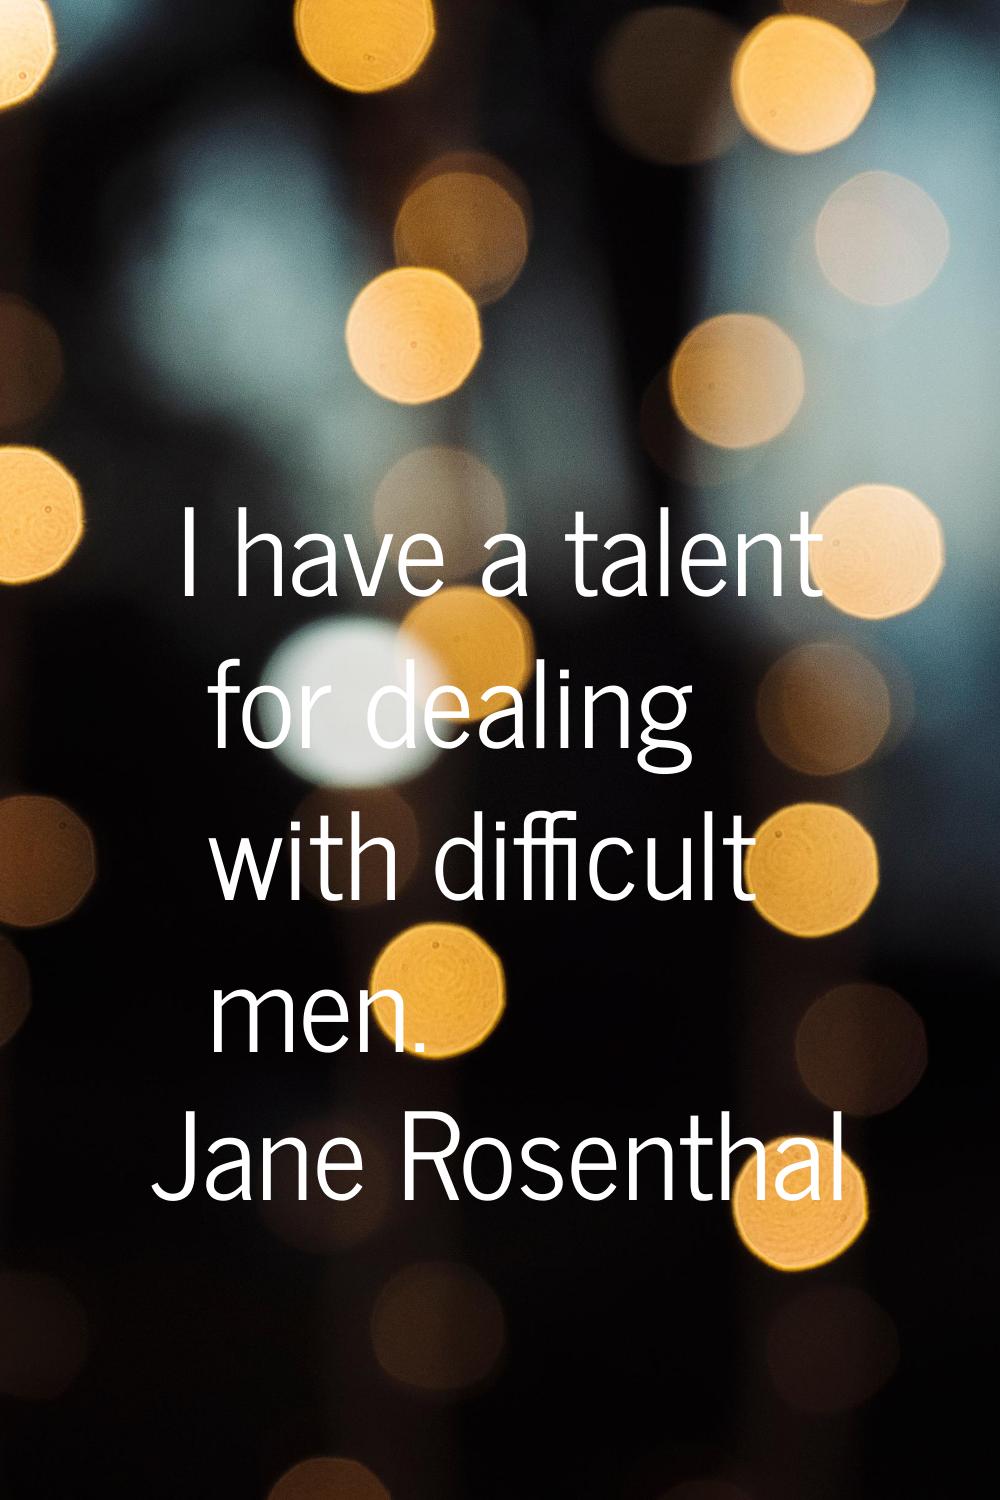 I have a talent for dealing with difficult men.